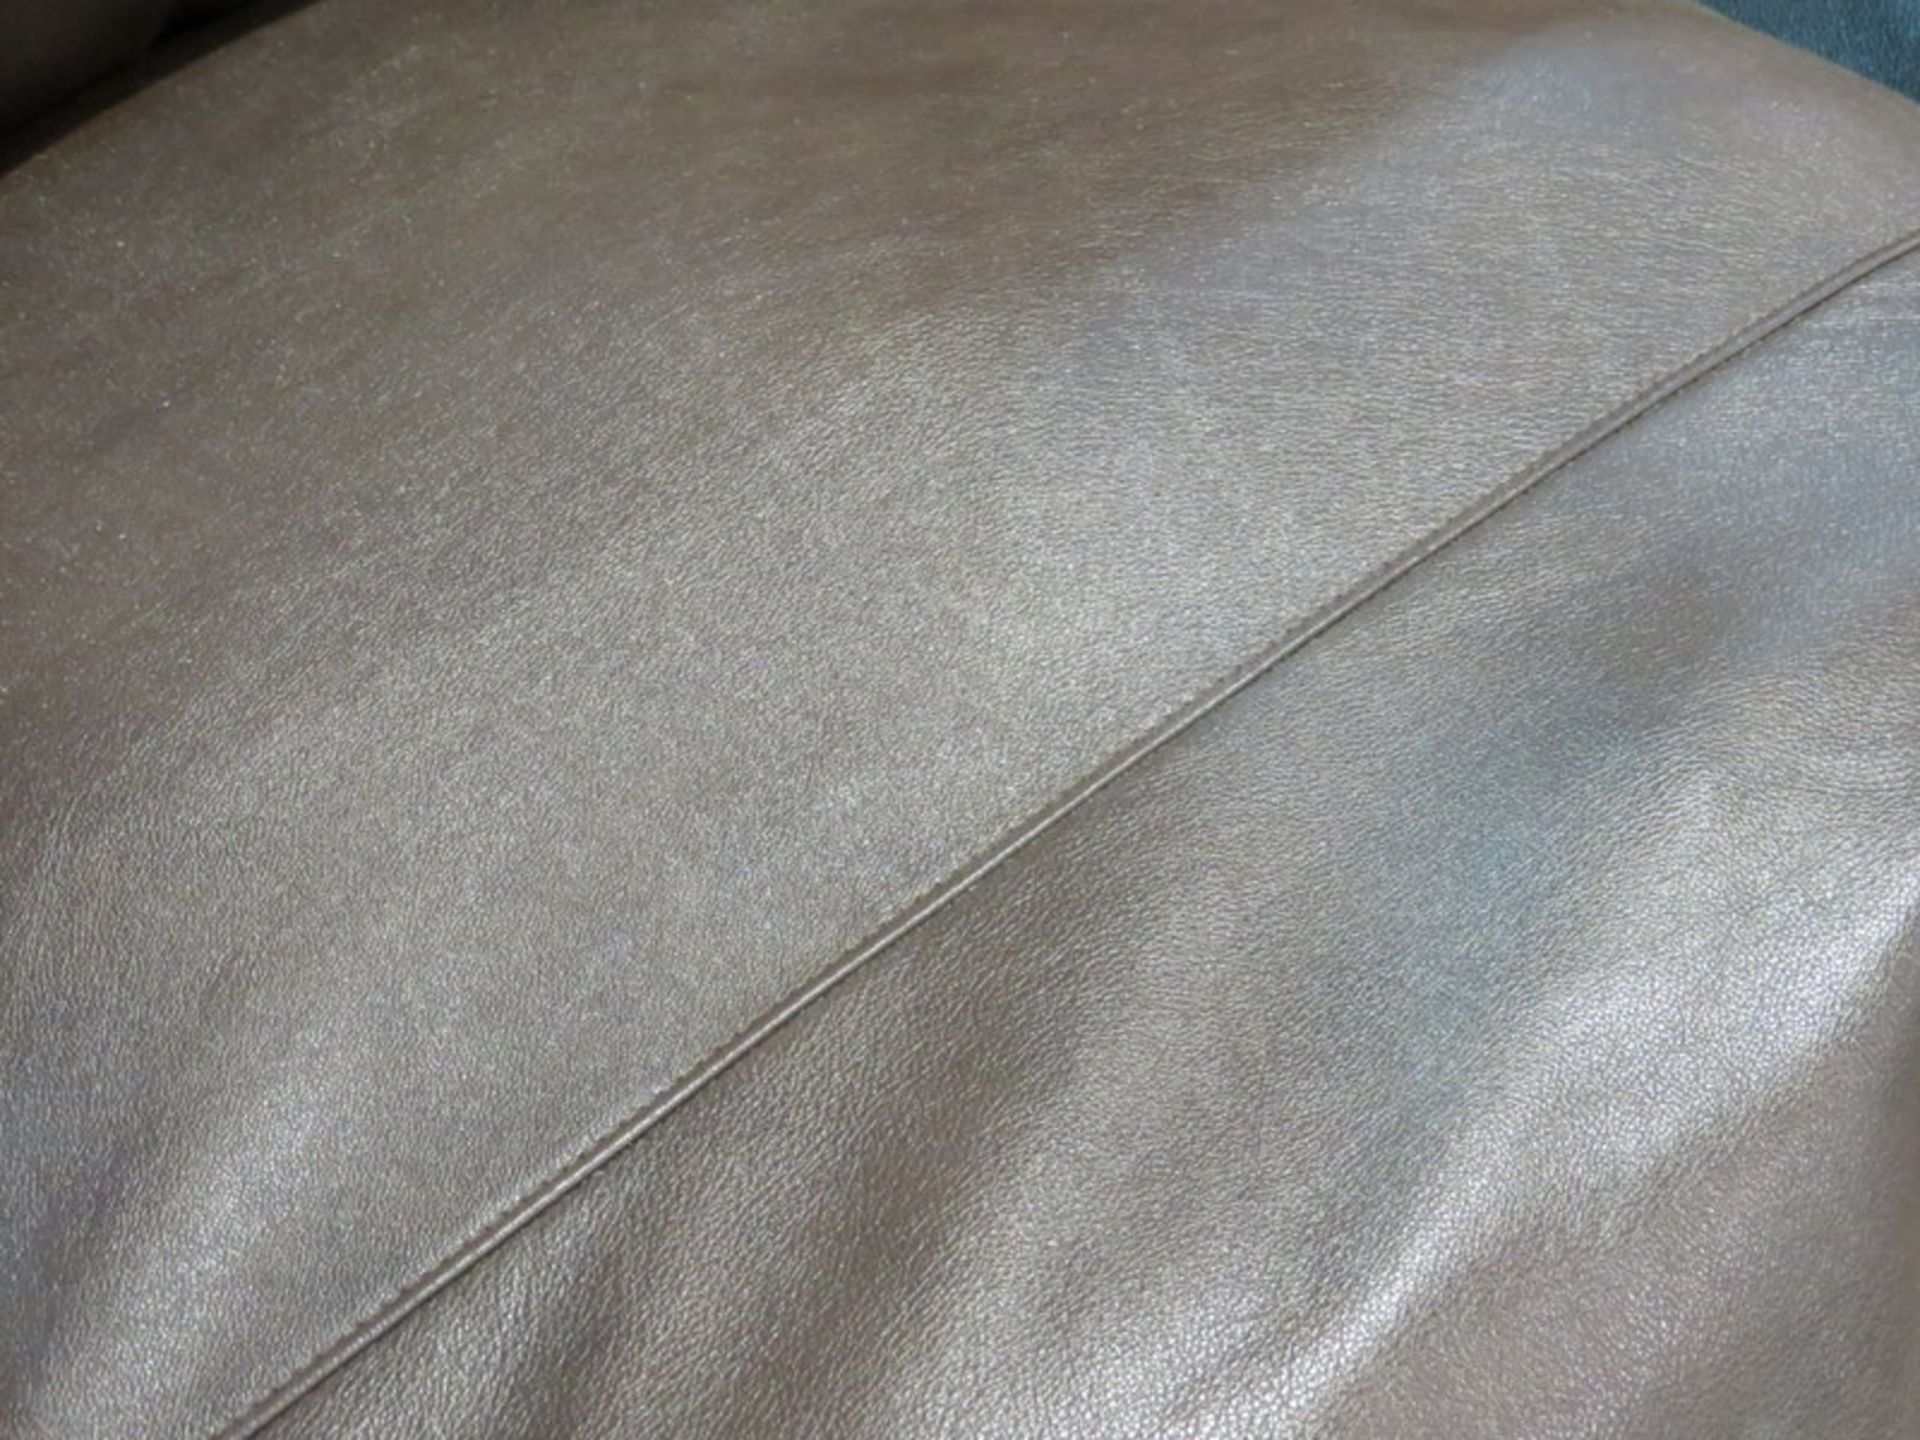 3 Seater Miracle brown 100% leather sofa. New in factory wrapping - 2200 x 970mm (LxD) - Image 3 of 4